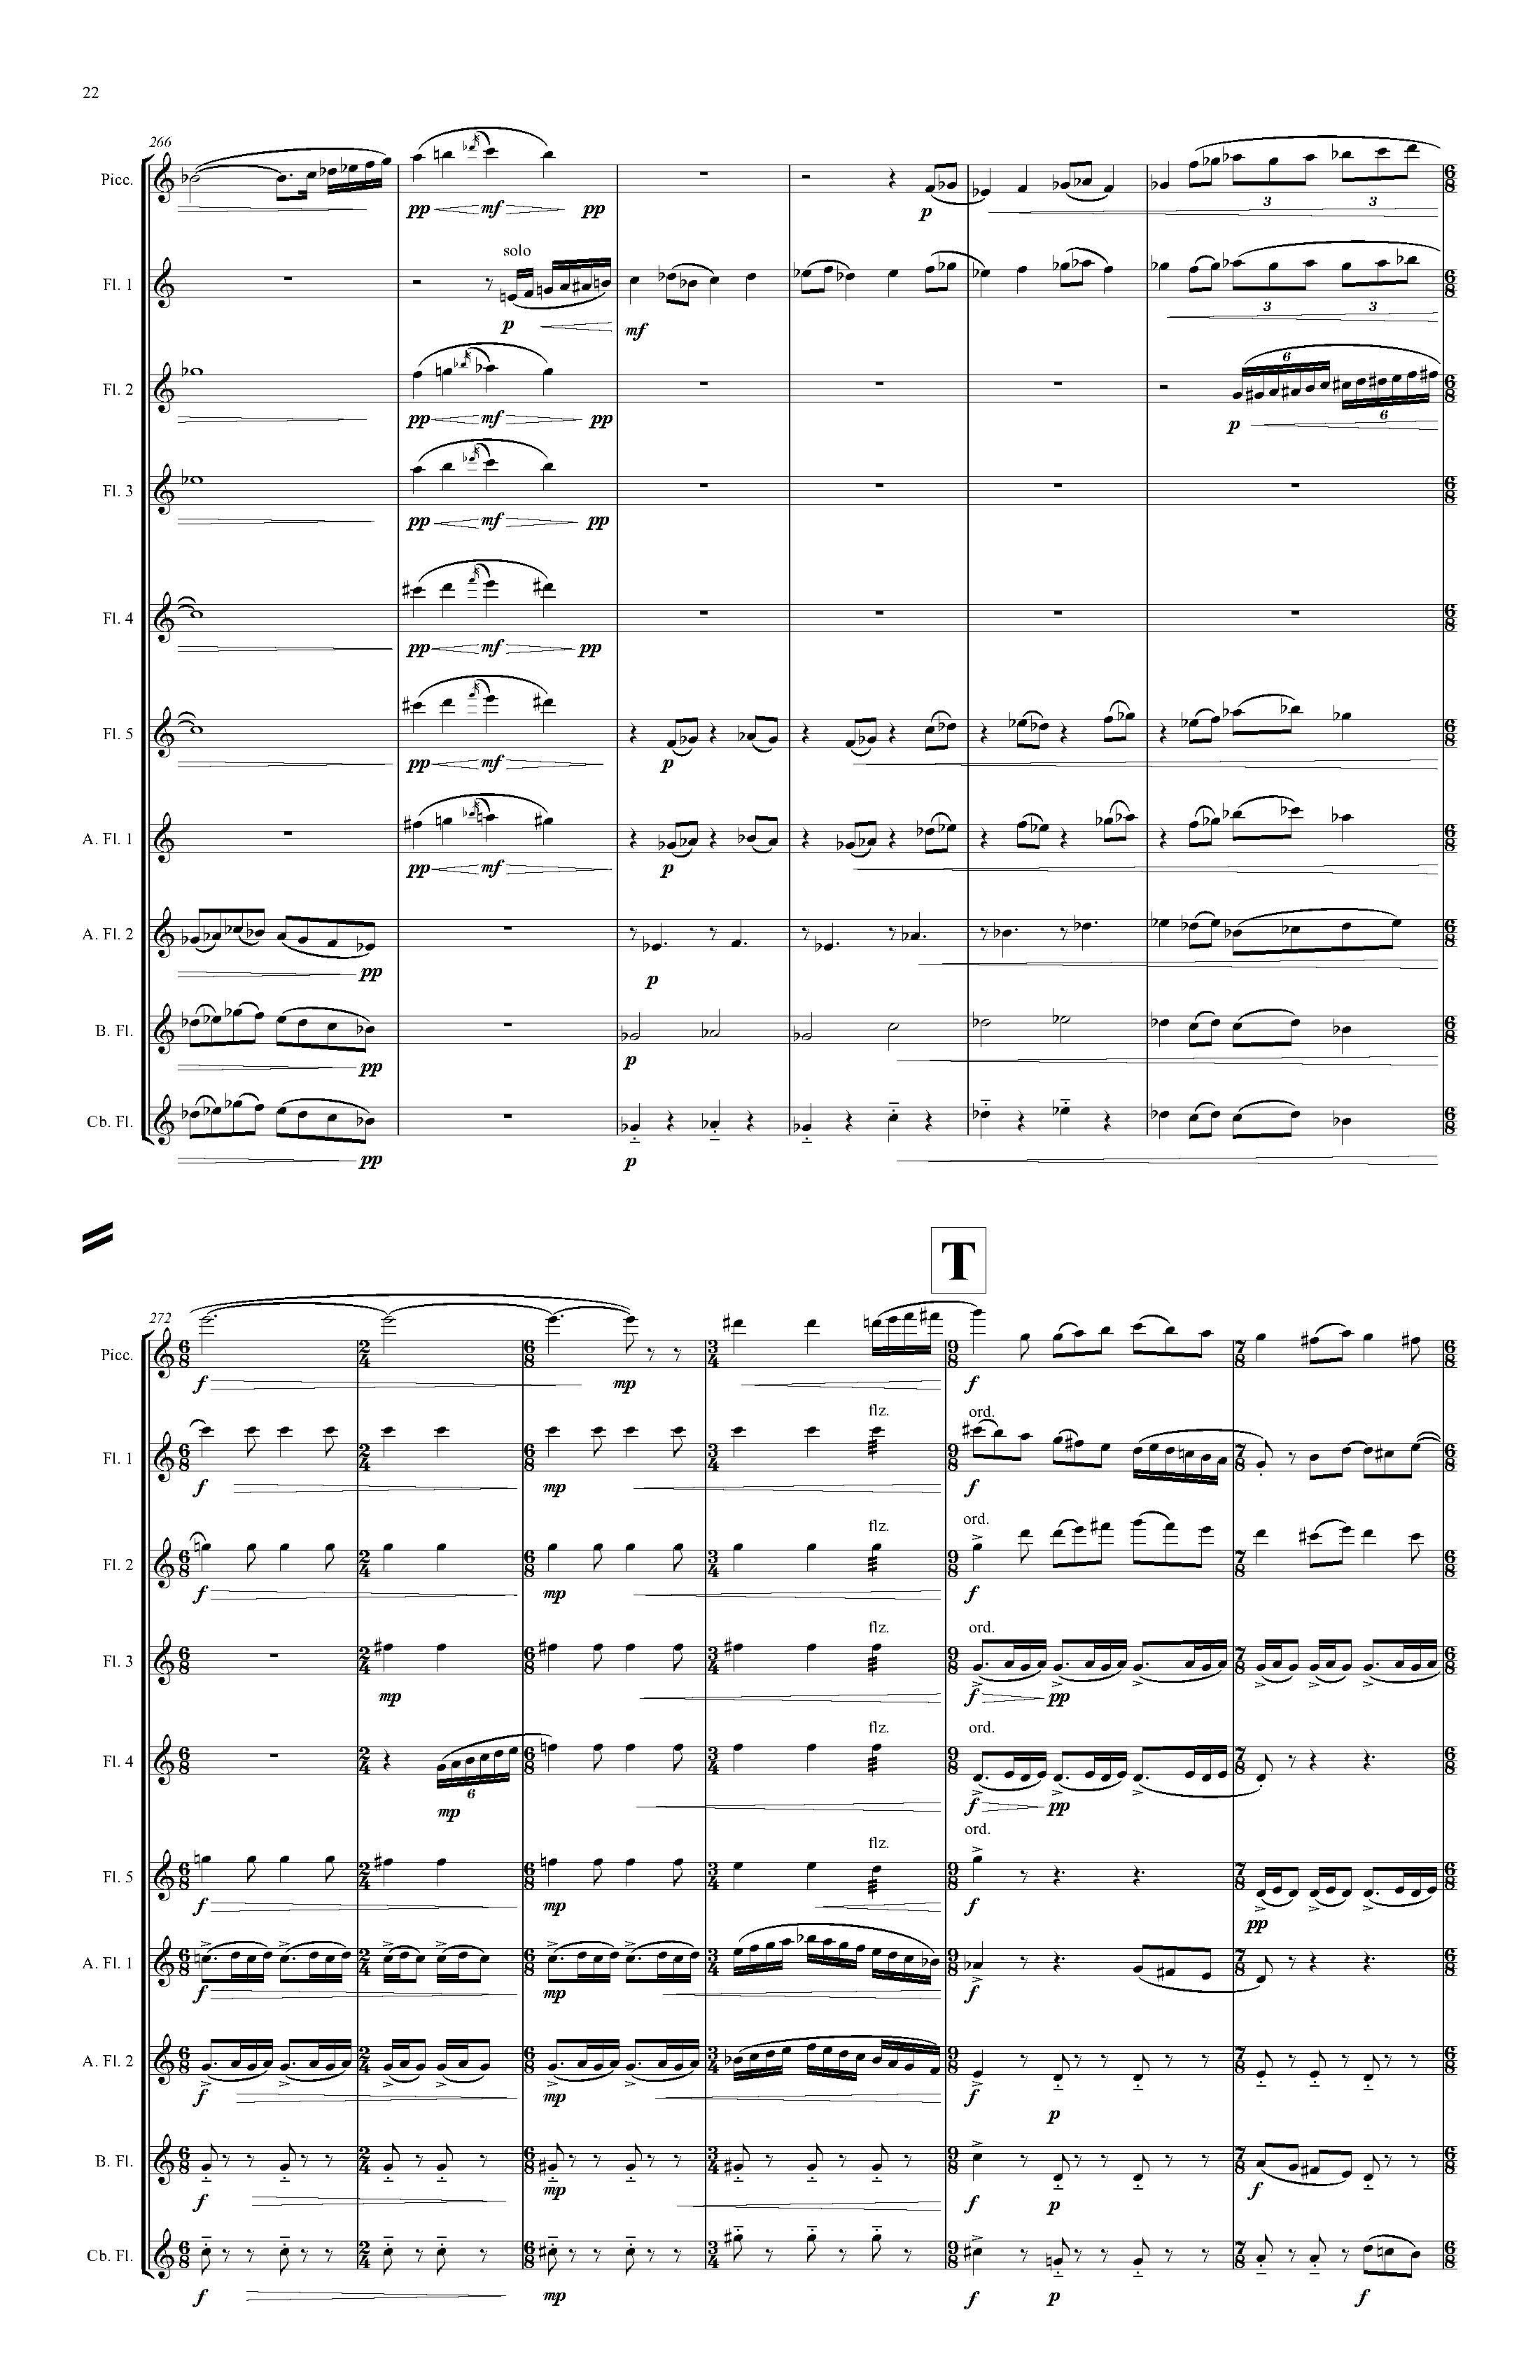 PIPES - Complete Score_Page_28.jpg